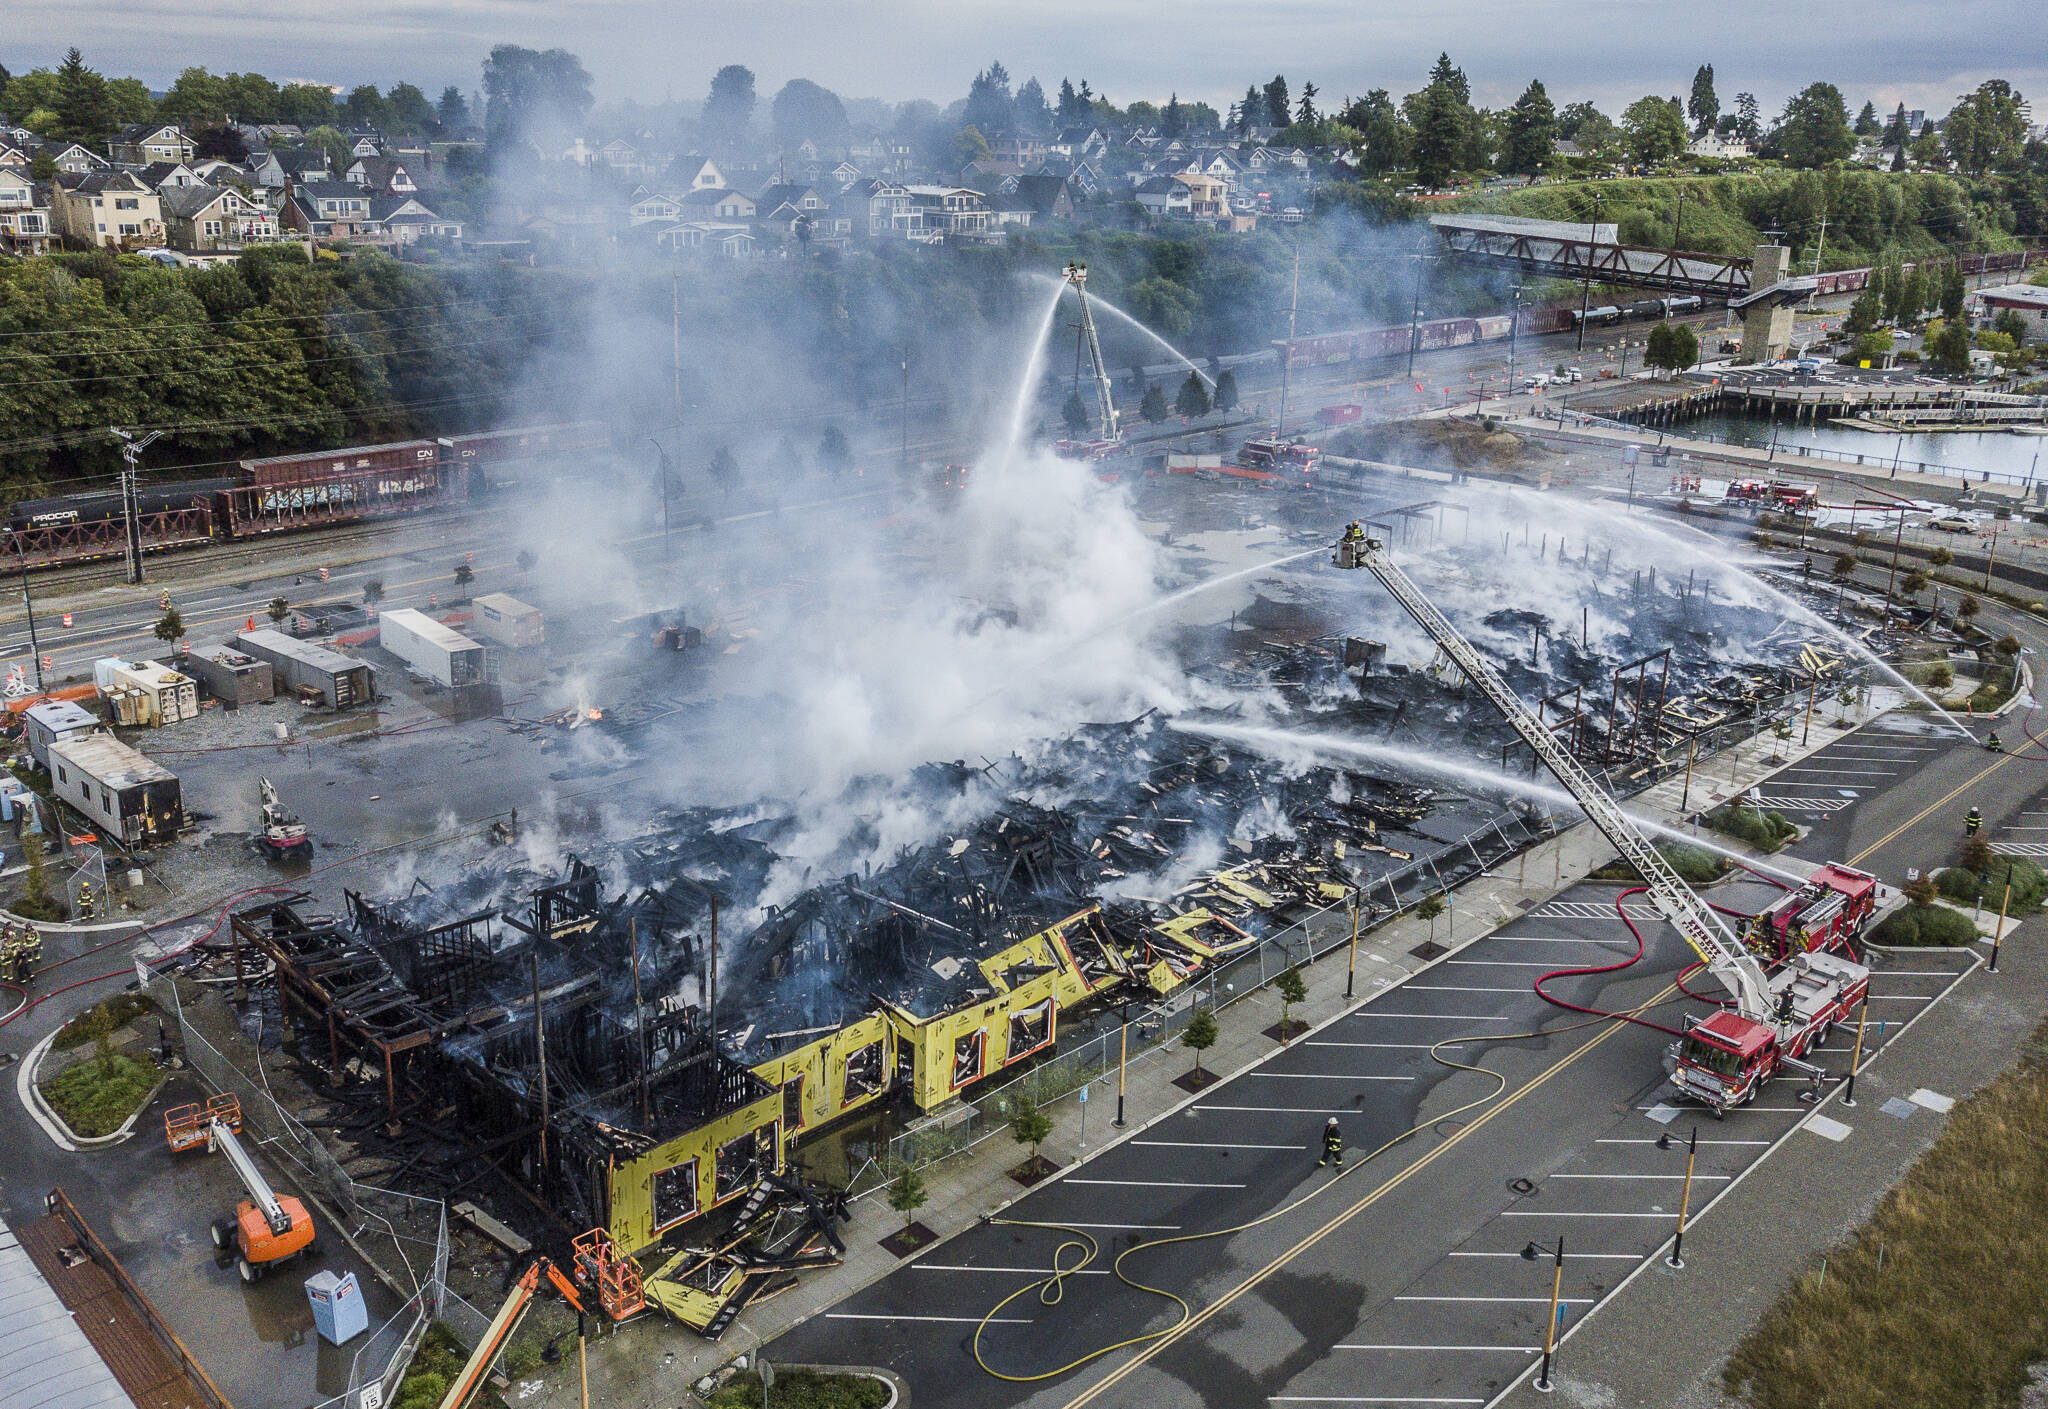 Smoke comes up from the Waterfront Place Apartments complex that caught fire along West Marine View Drive on July 16, 2020, in Everett. (Olivia Vanni / The Herald)